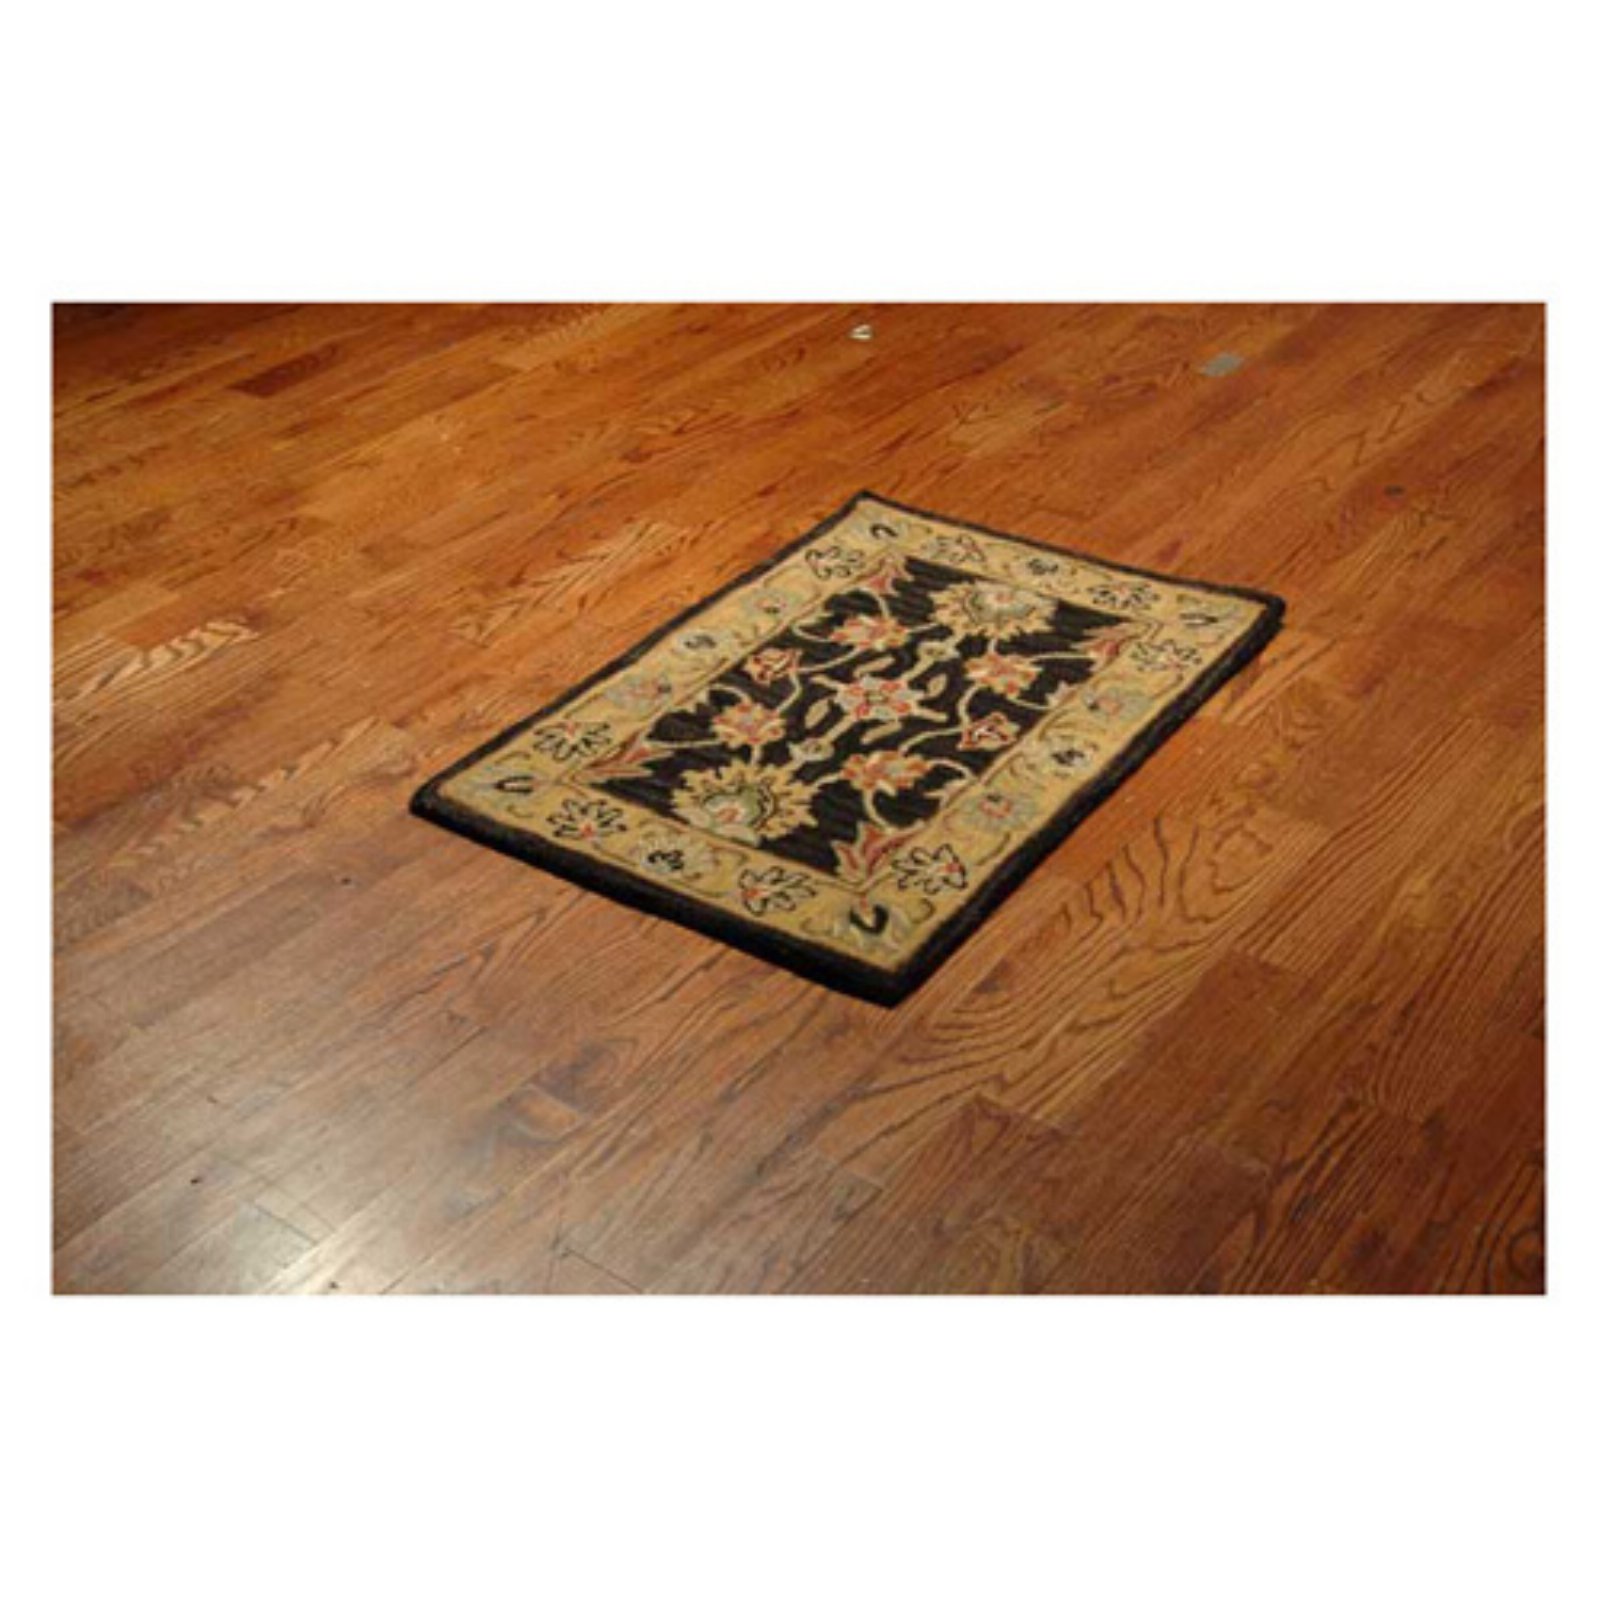 SAFAVIEH Heritage Regis Traditional Wool Area Rug, Charcoal/Gold, 3'6" x 3'6" Round - image 3 of 10